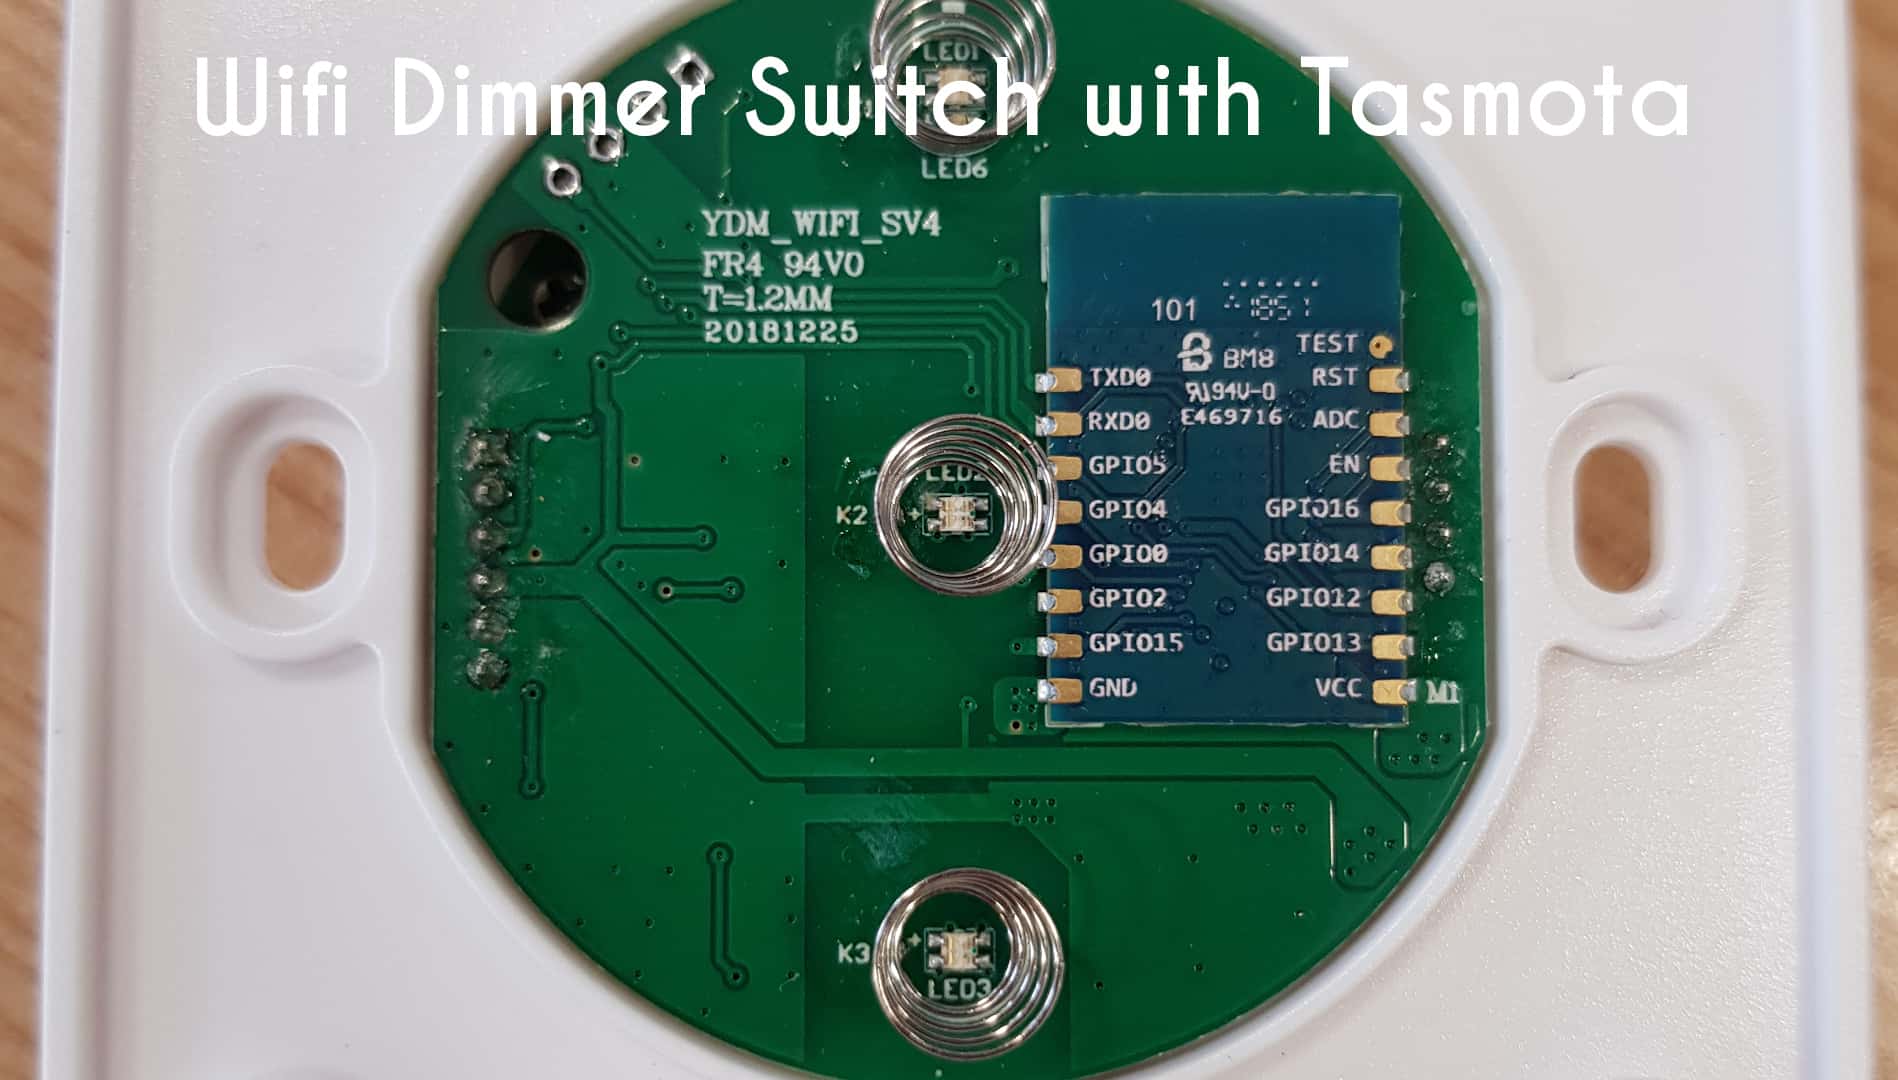 Wifi Dimmer switch with Tasmota - Tuya Dimmer guide